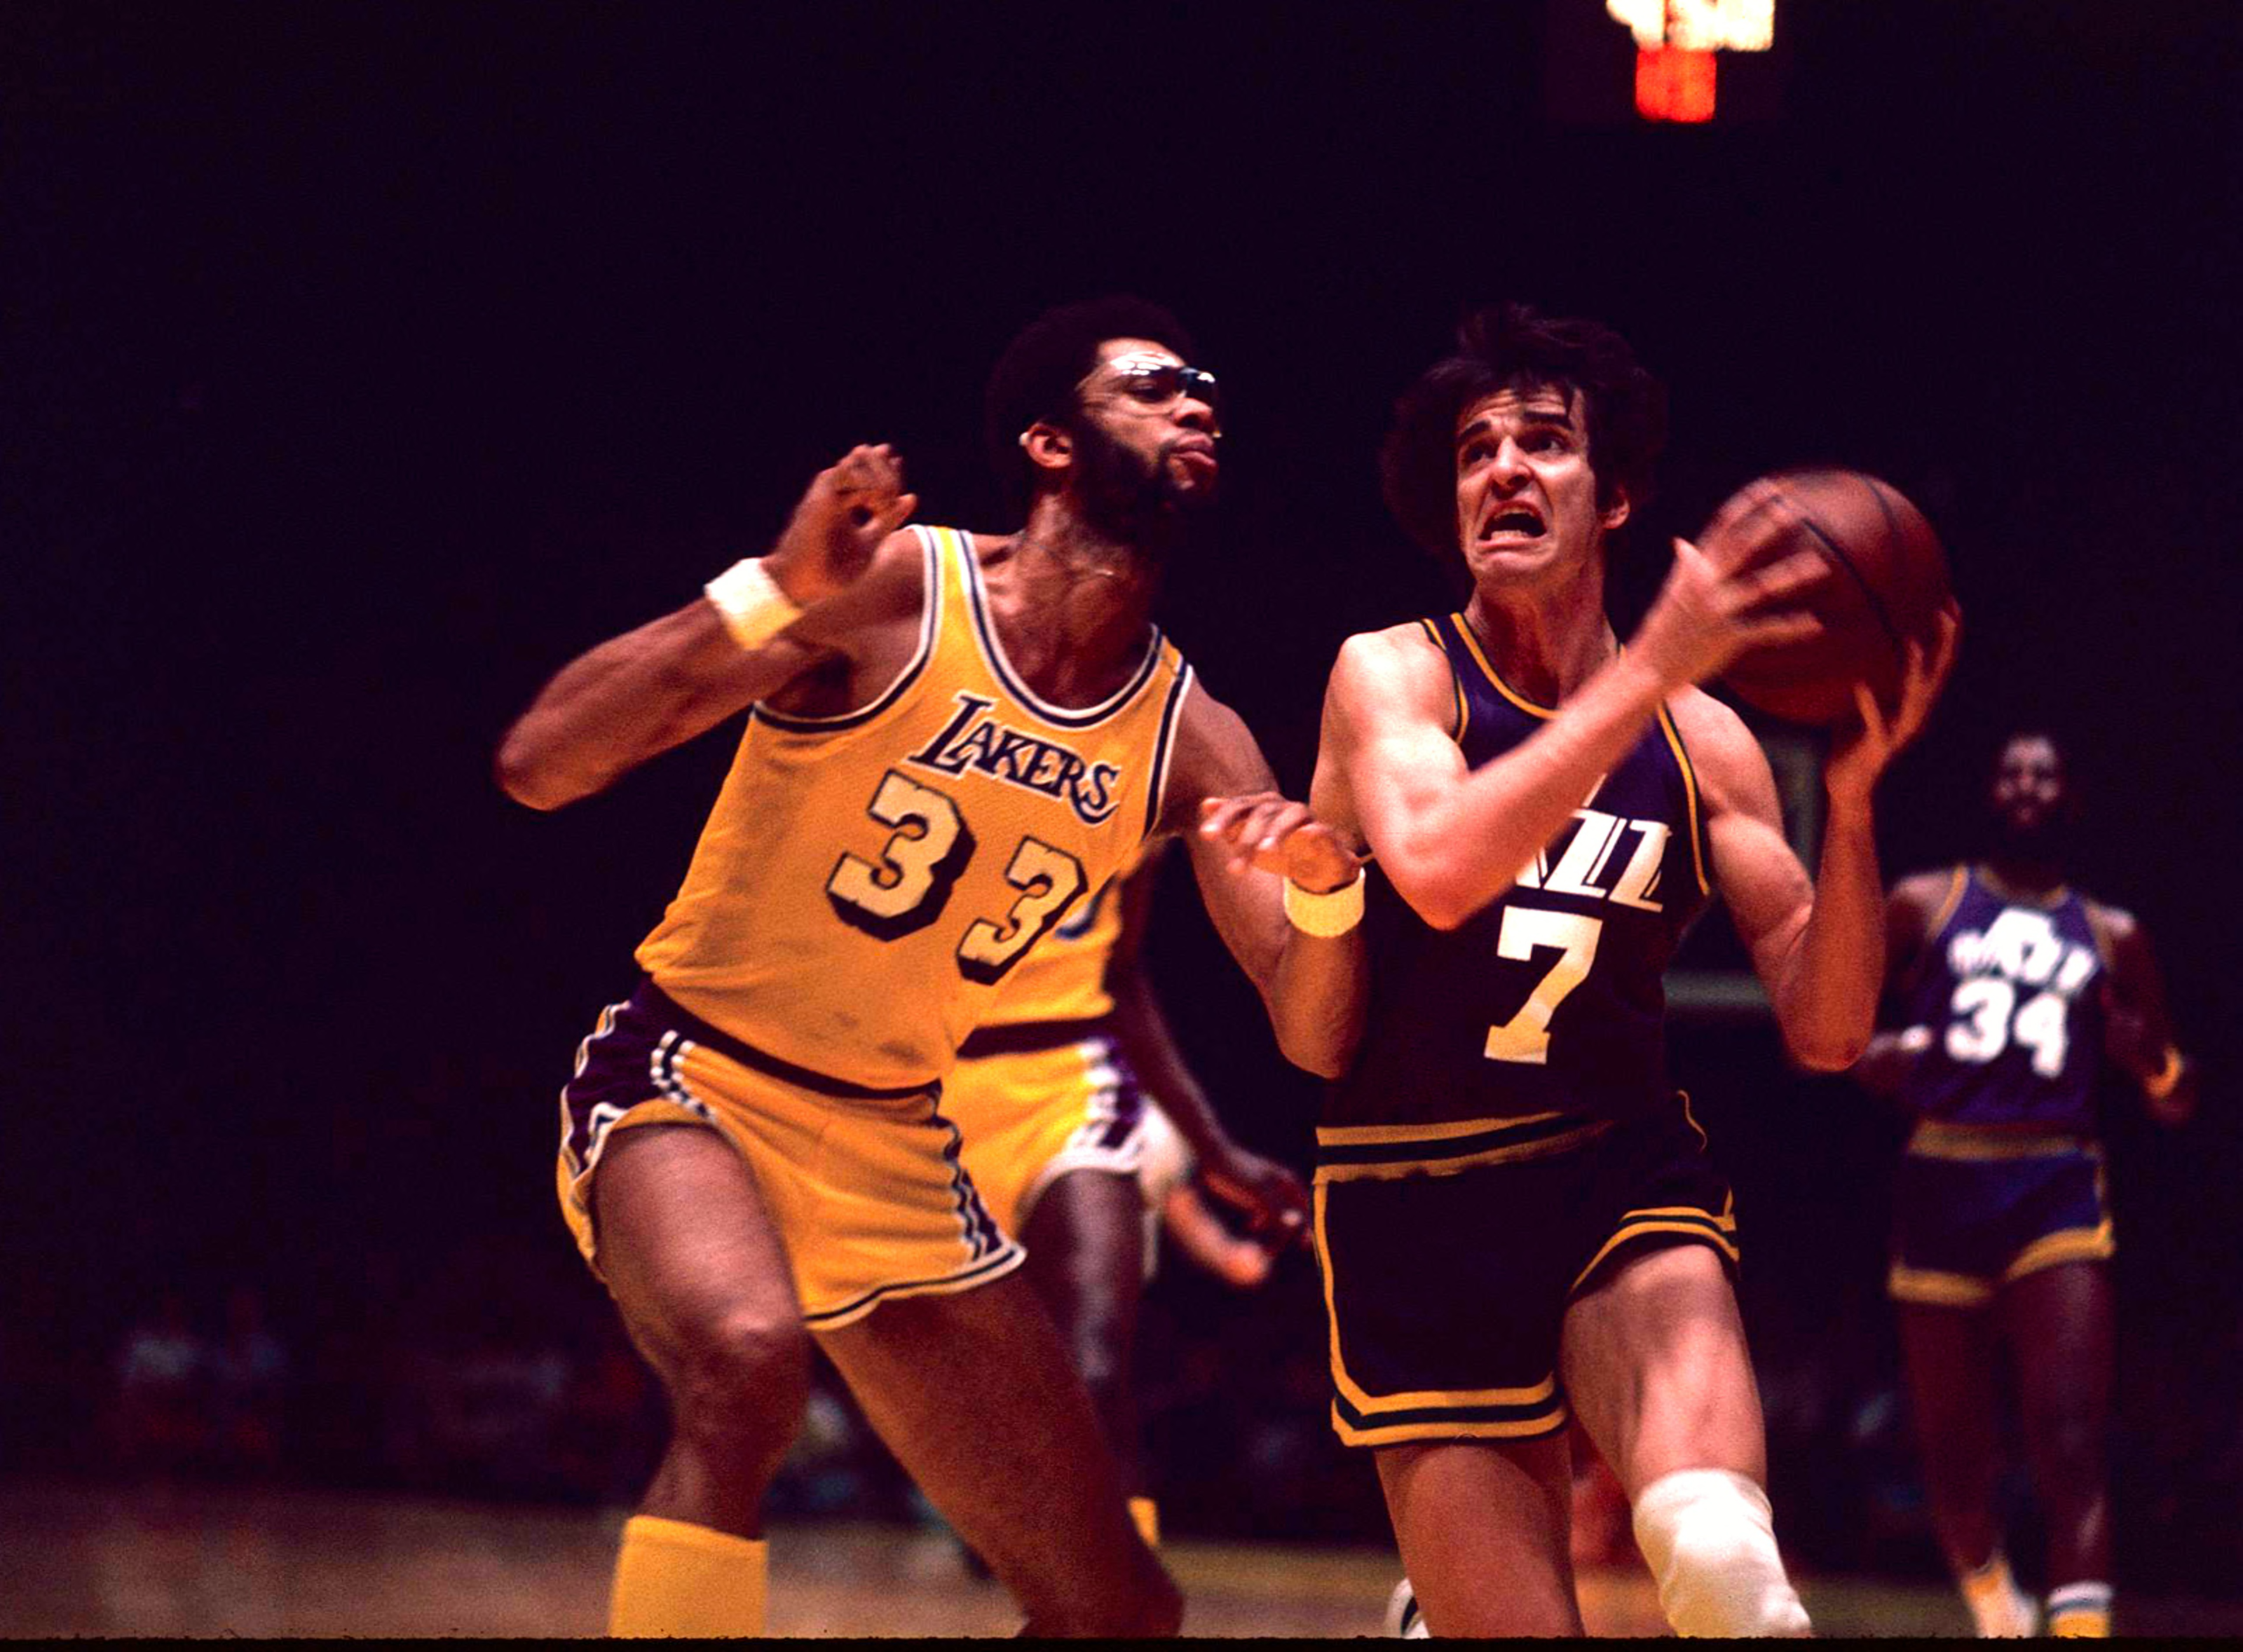 Pete Maravich's jersey to be retired by the Atlanta Hawks